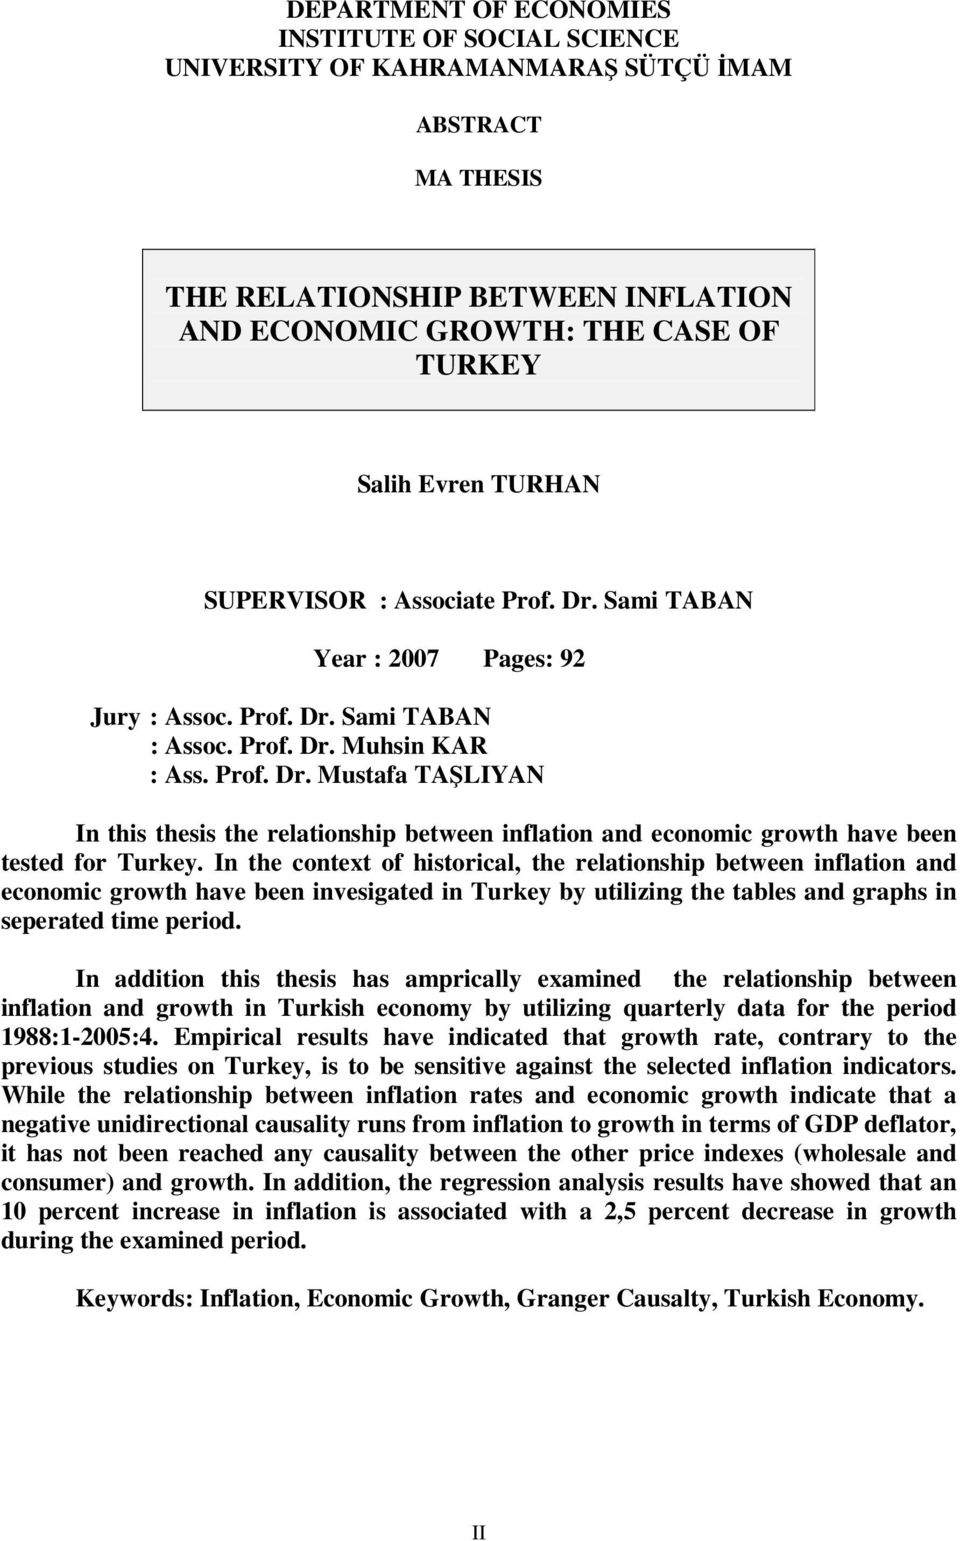 In the context of historical, the relationship between inflation and economic growth have been invesigated in Turkey by utilizing the tables and graphs in seperated time period.